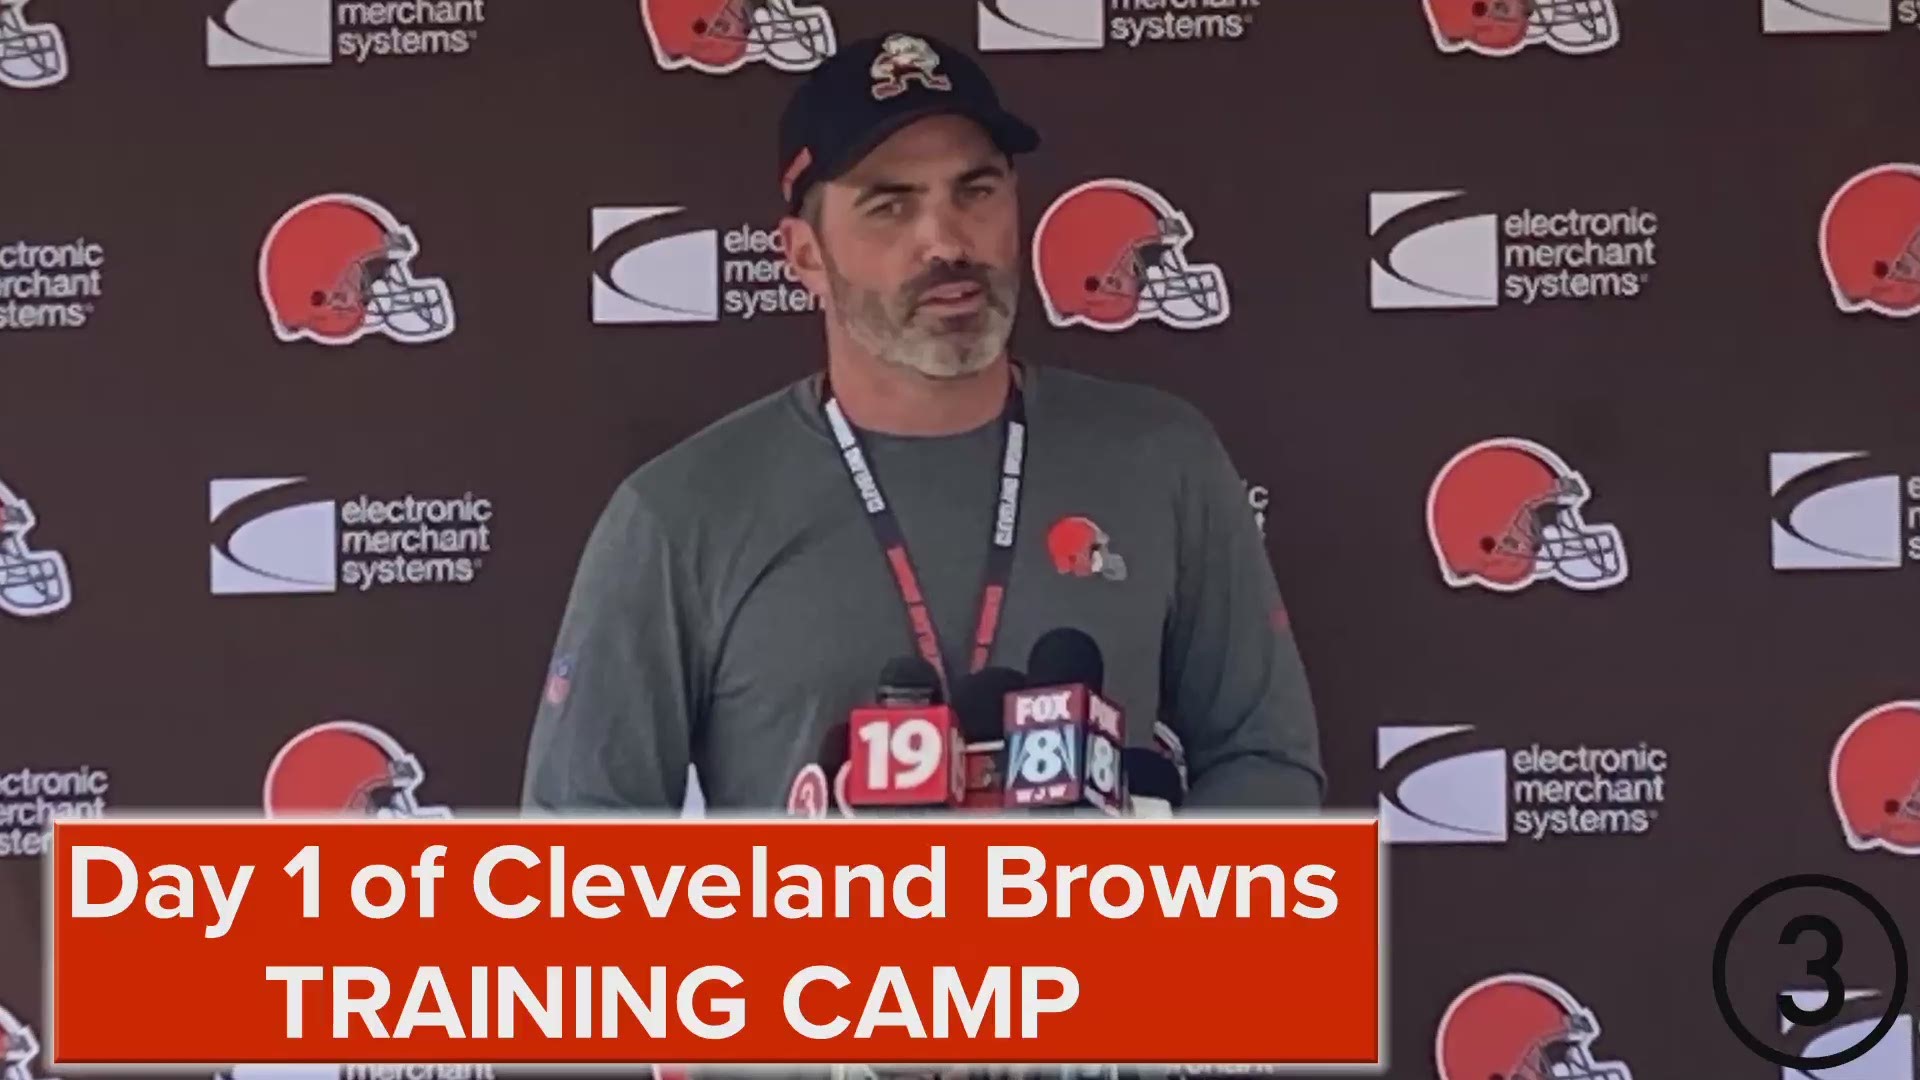 The Cleveland Browns held their first practice of their 2021 training camp on Wednesday.